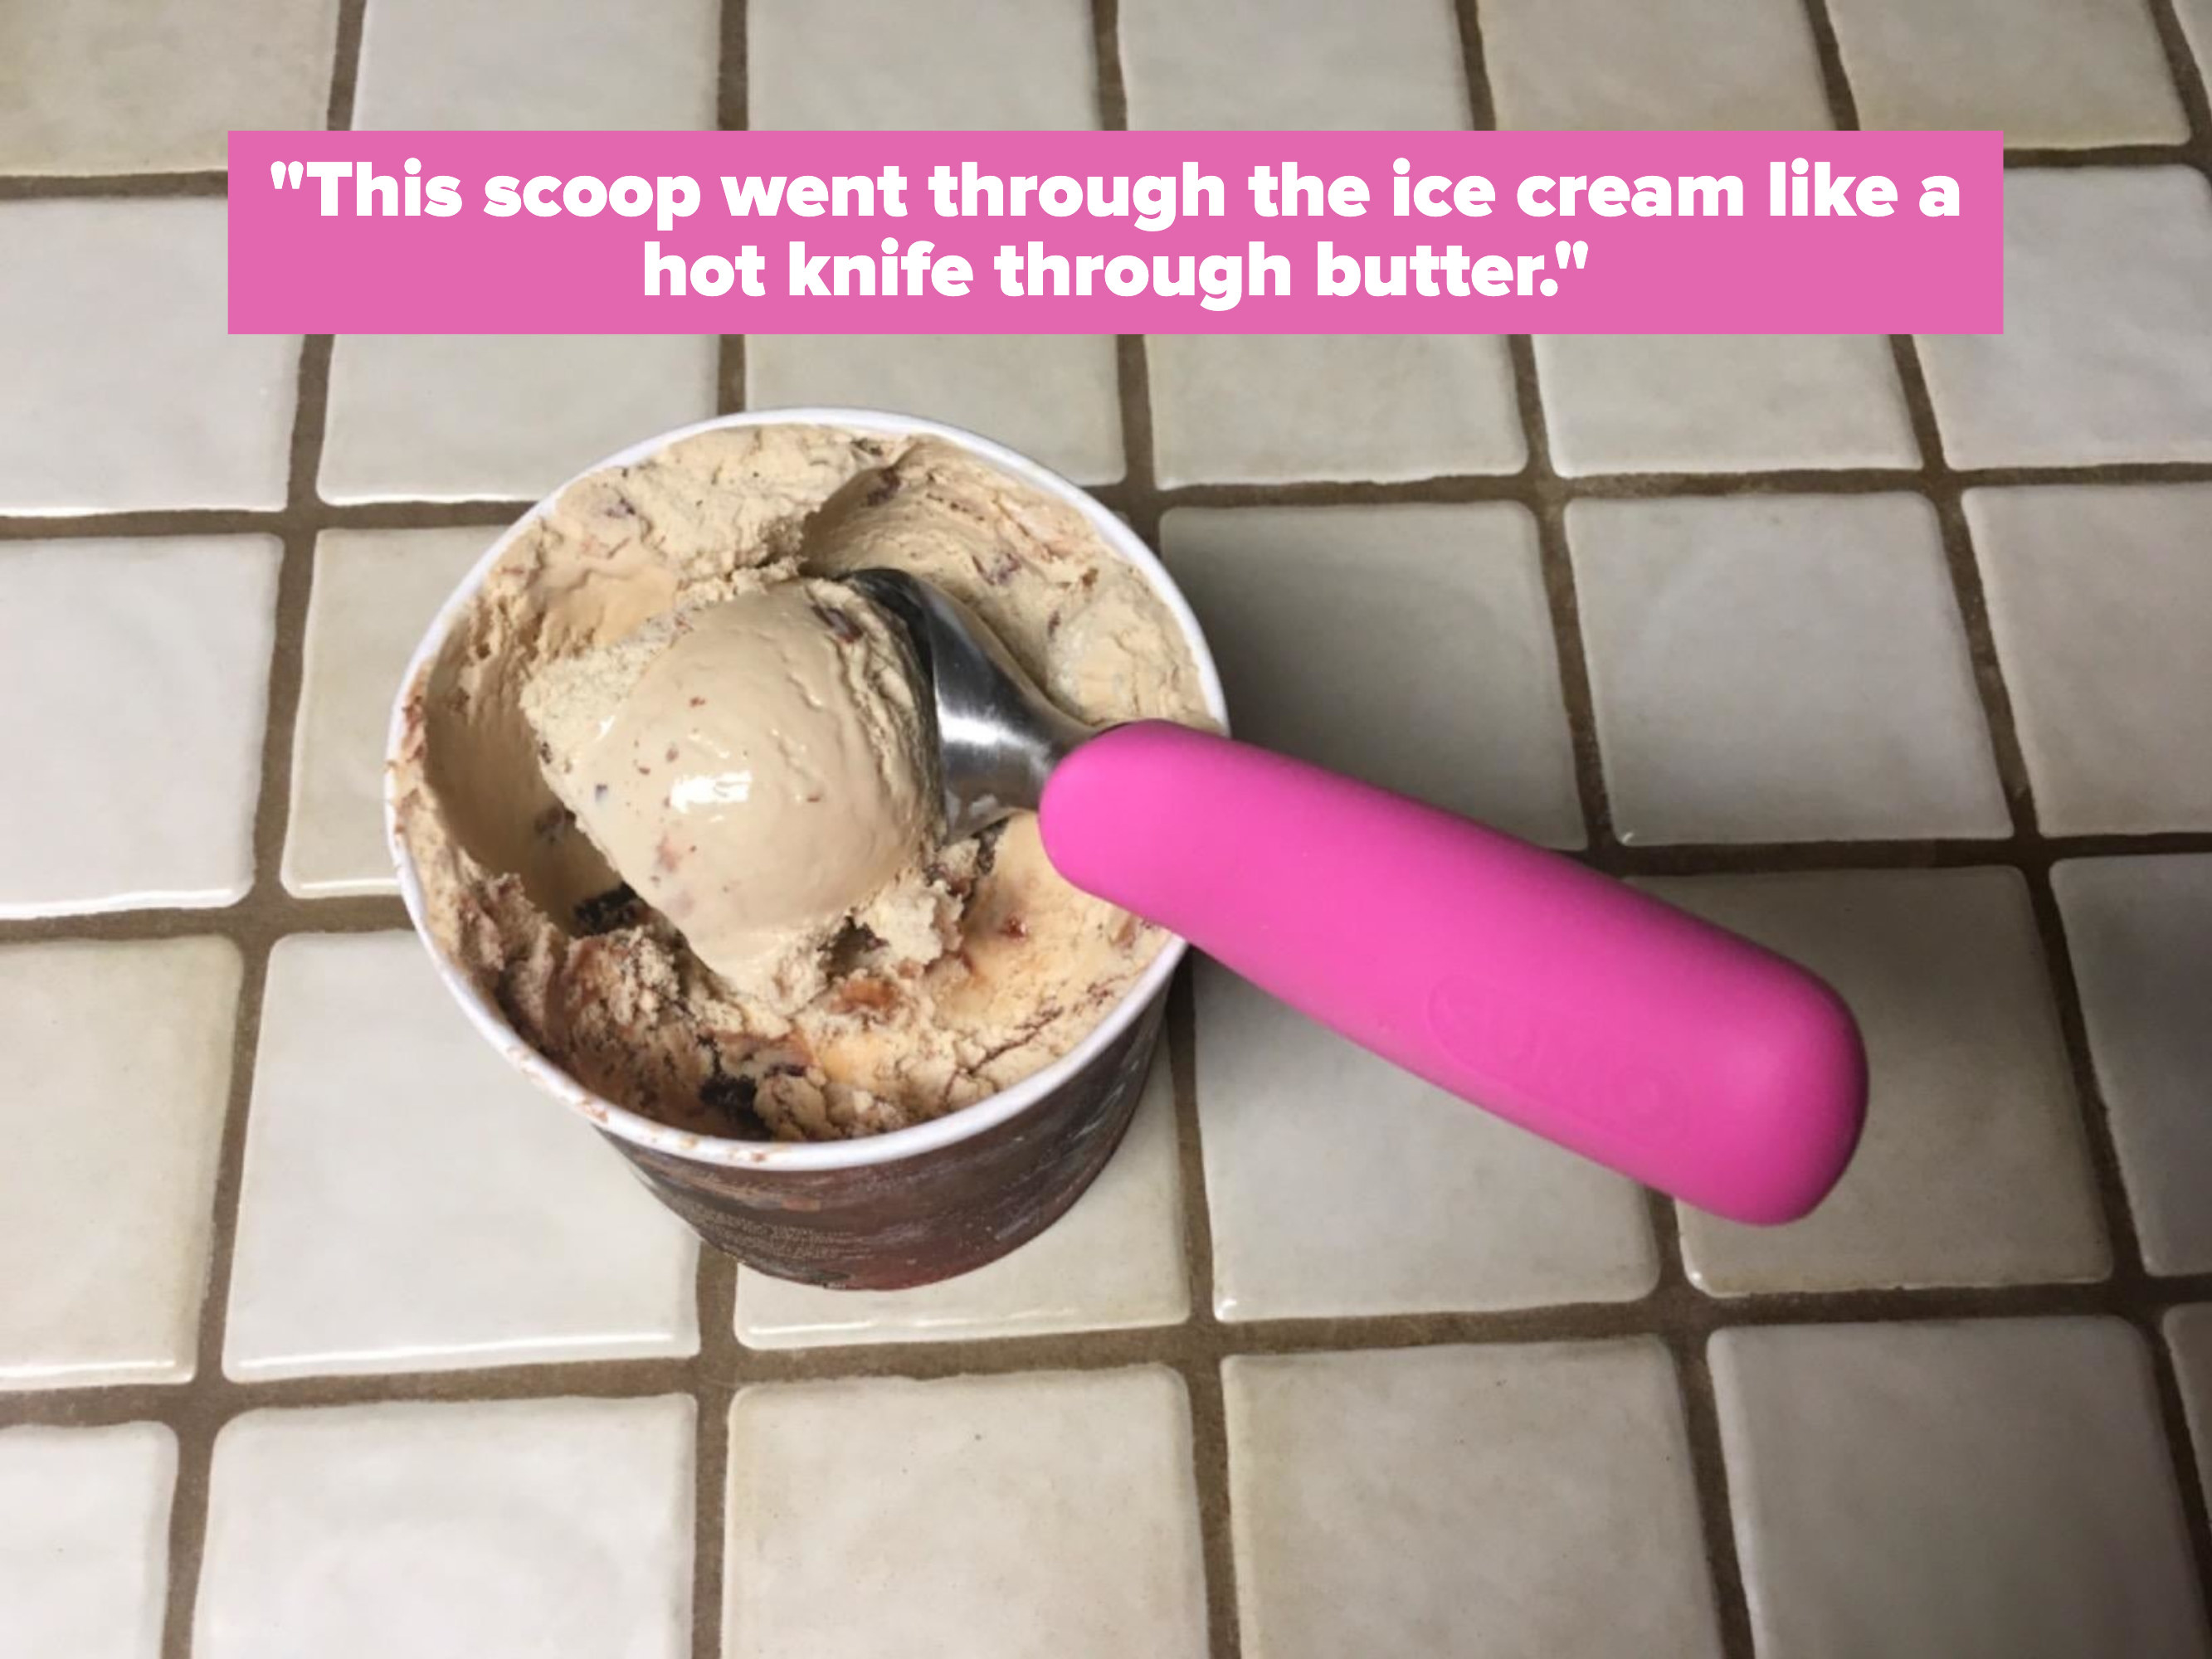 The pink scoop scooping out ice cream with reviewer text &quot;this scoop went through ice cream like a hot knife through butter&quot;